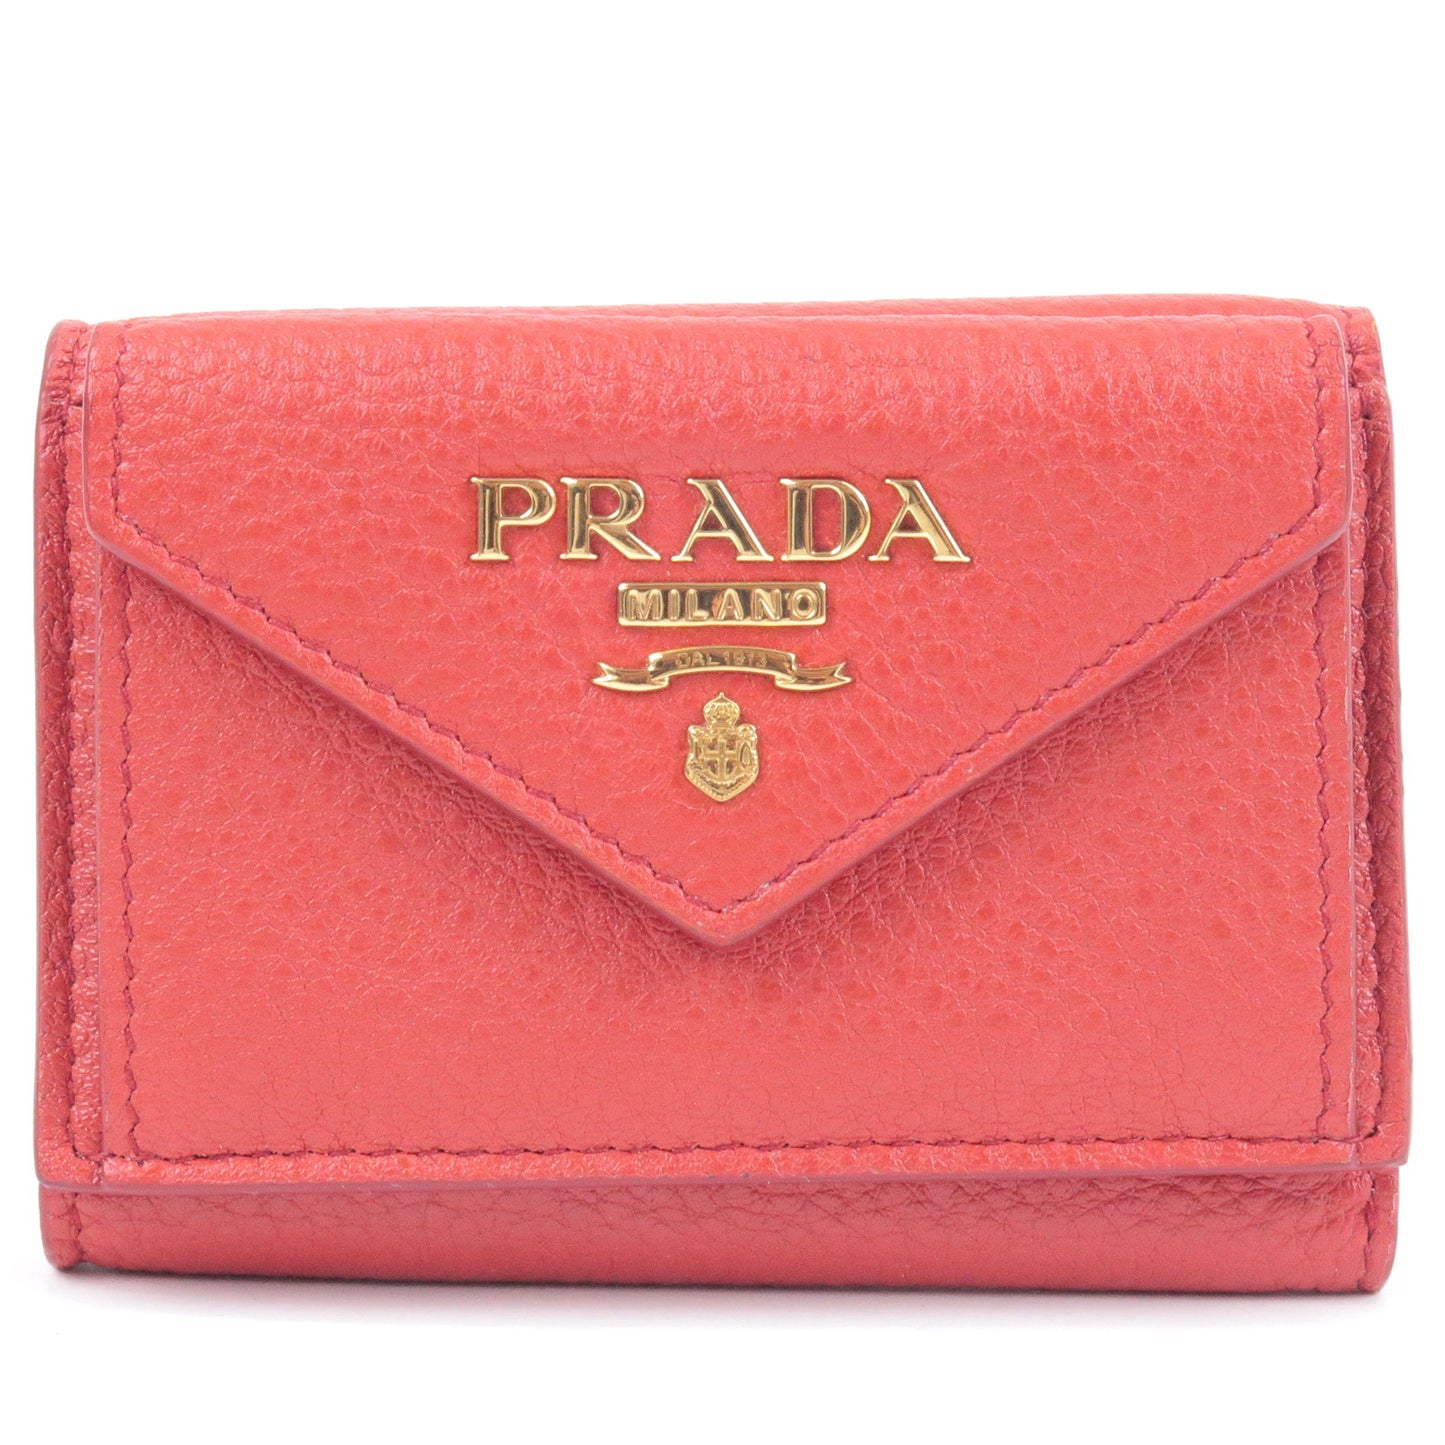 PRADA-Leather-Trifold-Wallet-Coin-Case-ROSSO-Red-1MH021